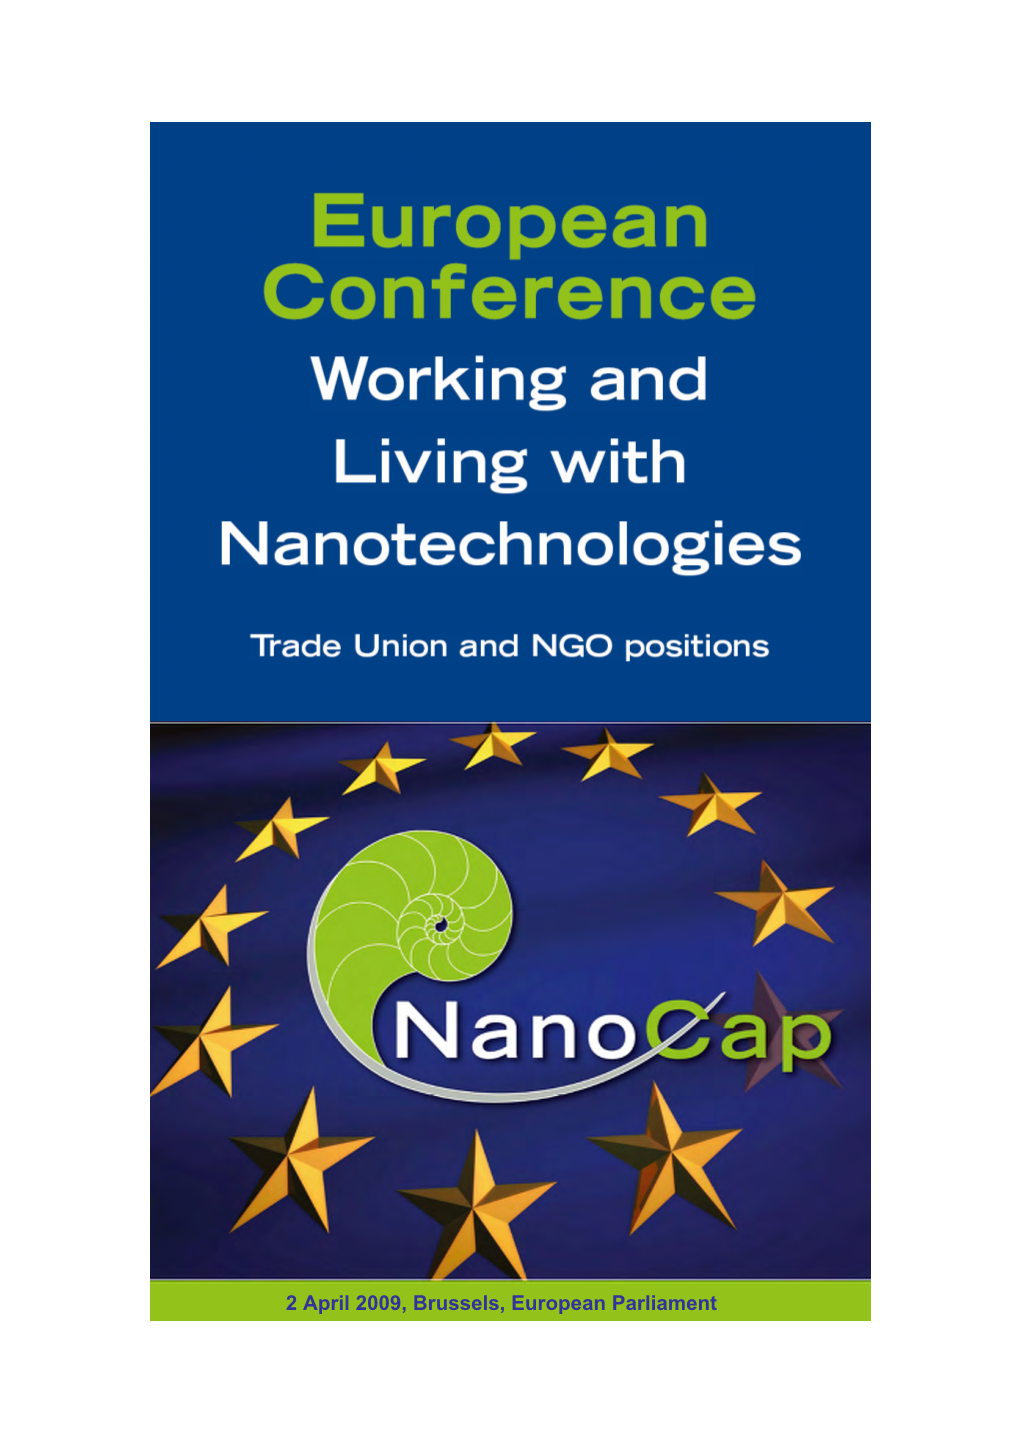 2 April 2009, Brussels, European Parliament 2 Proceedings Conference Nanocap / STOA-EP Working and Living with Nanotechnologies – Trade Union and NGO Positions